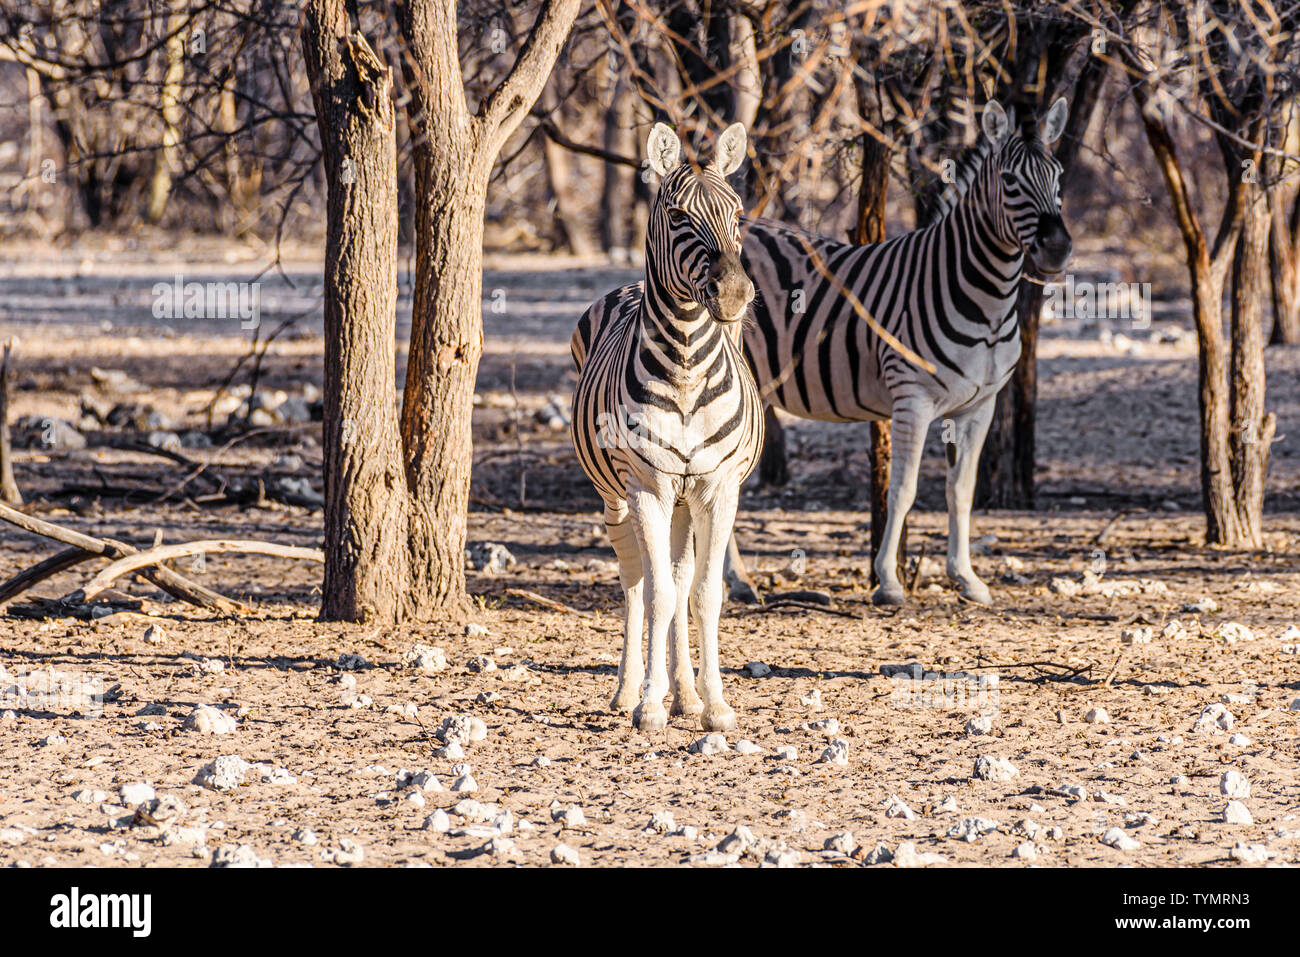 Plain zebra in a forested area of Namibia Stock Photo